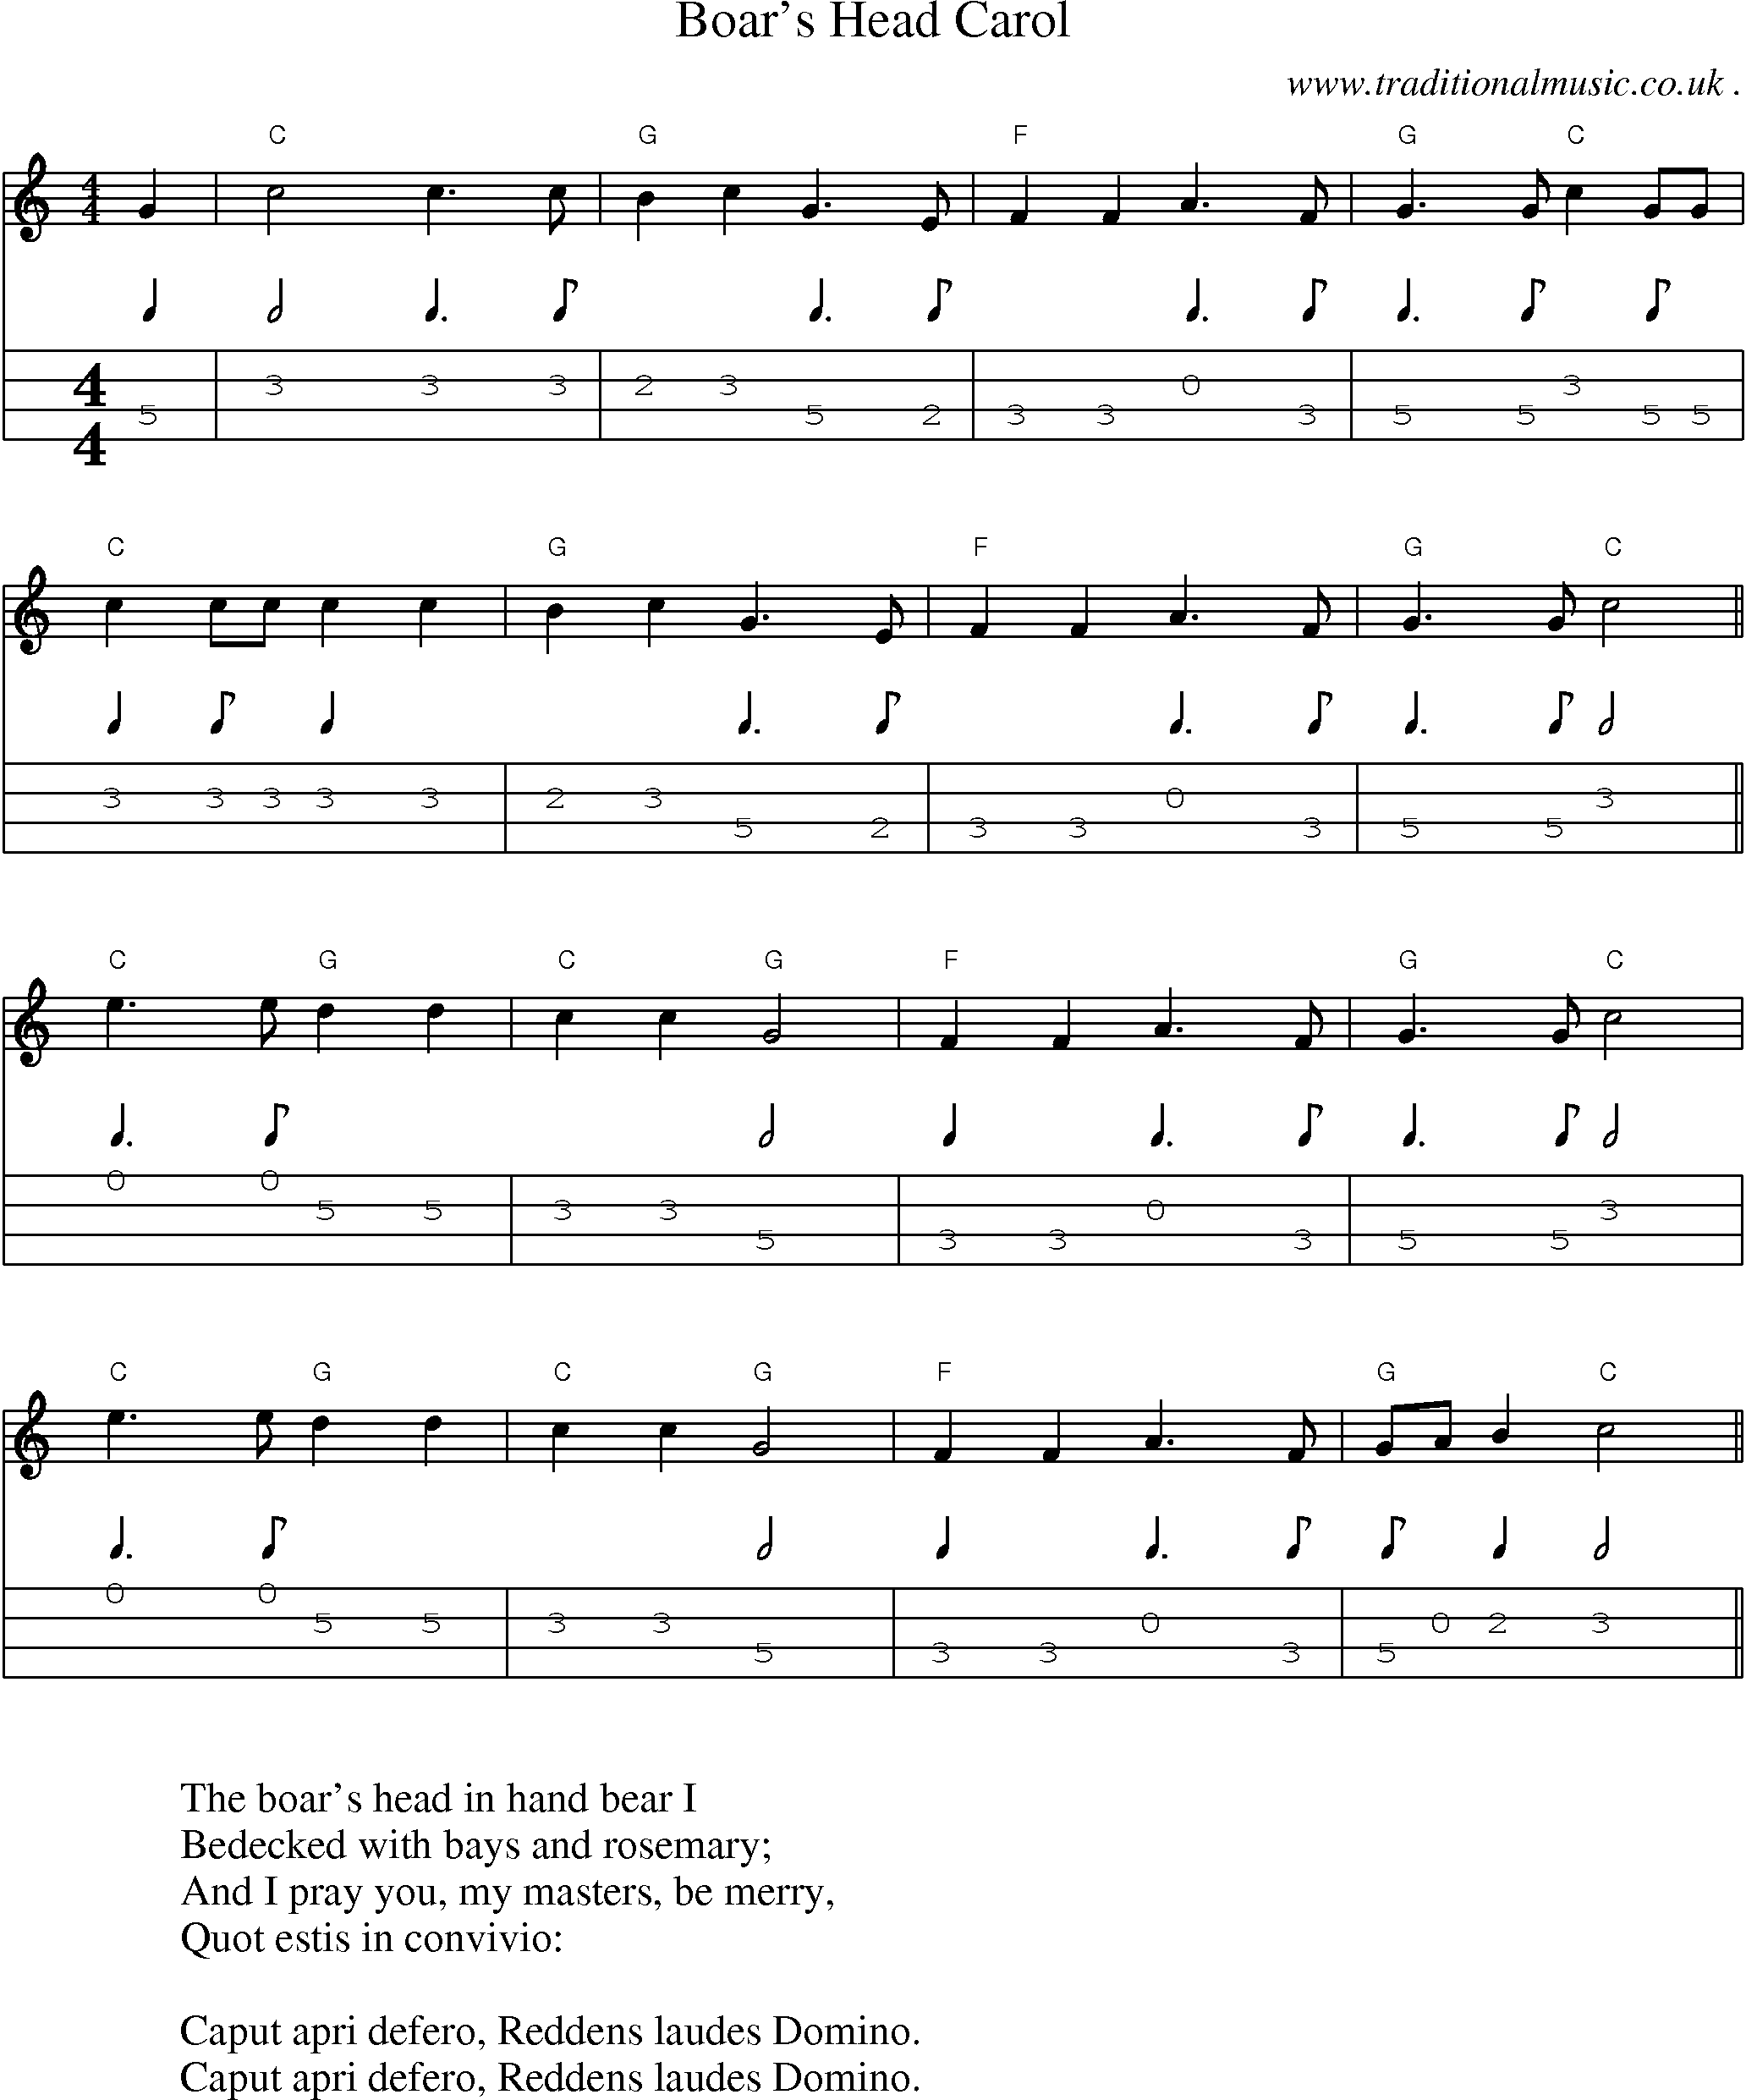 Music Score and Guitar Tabs for Boars Head Carol